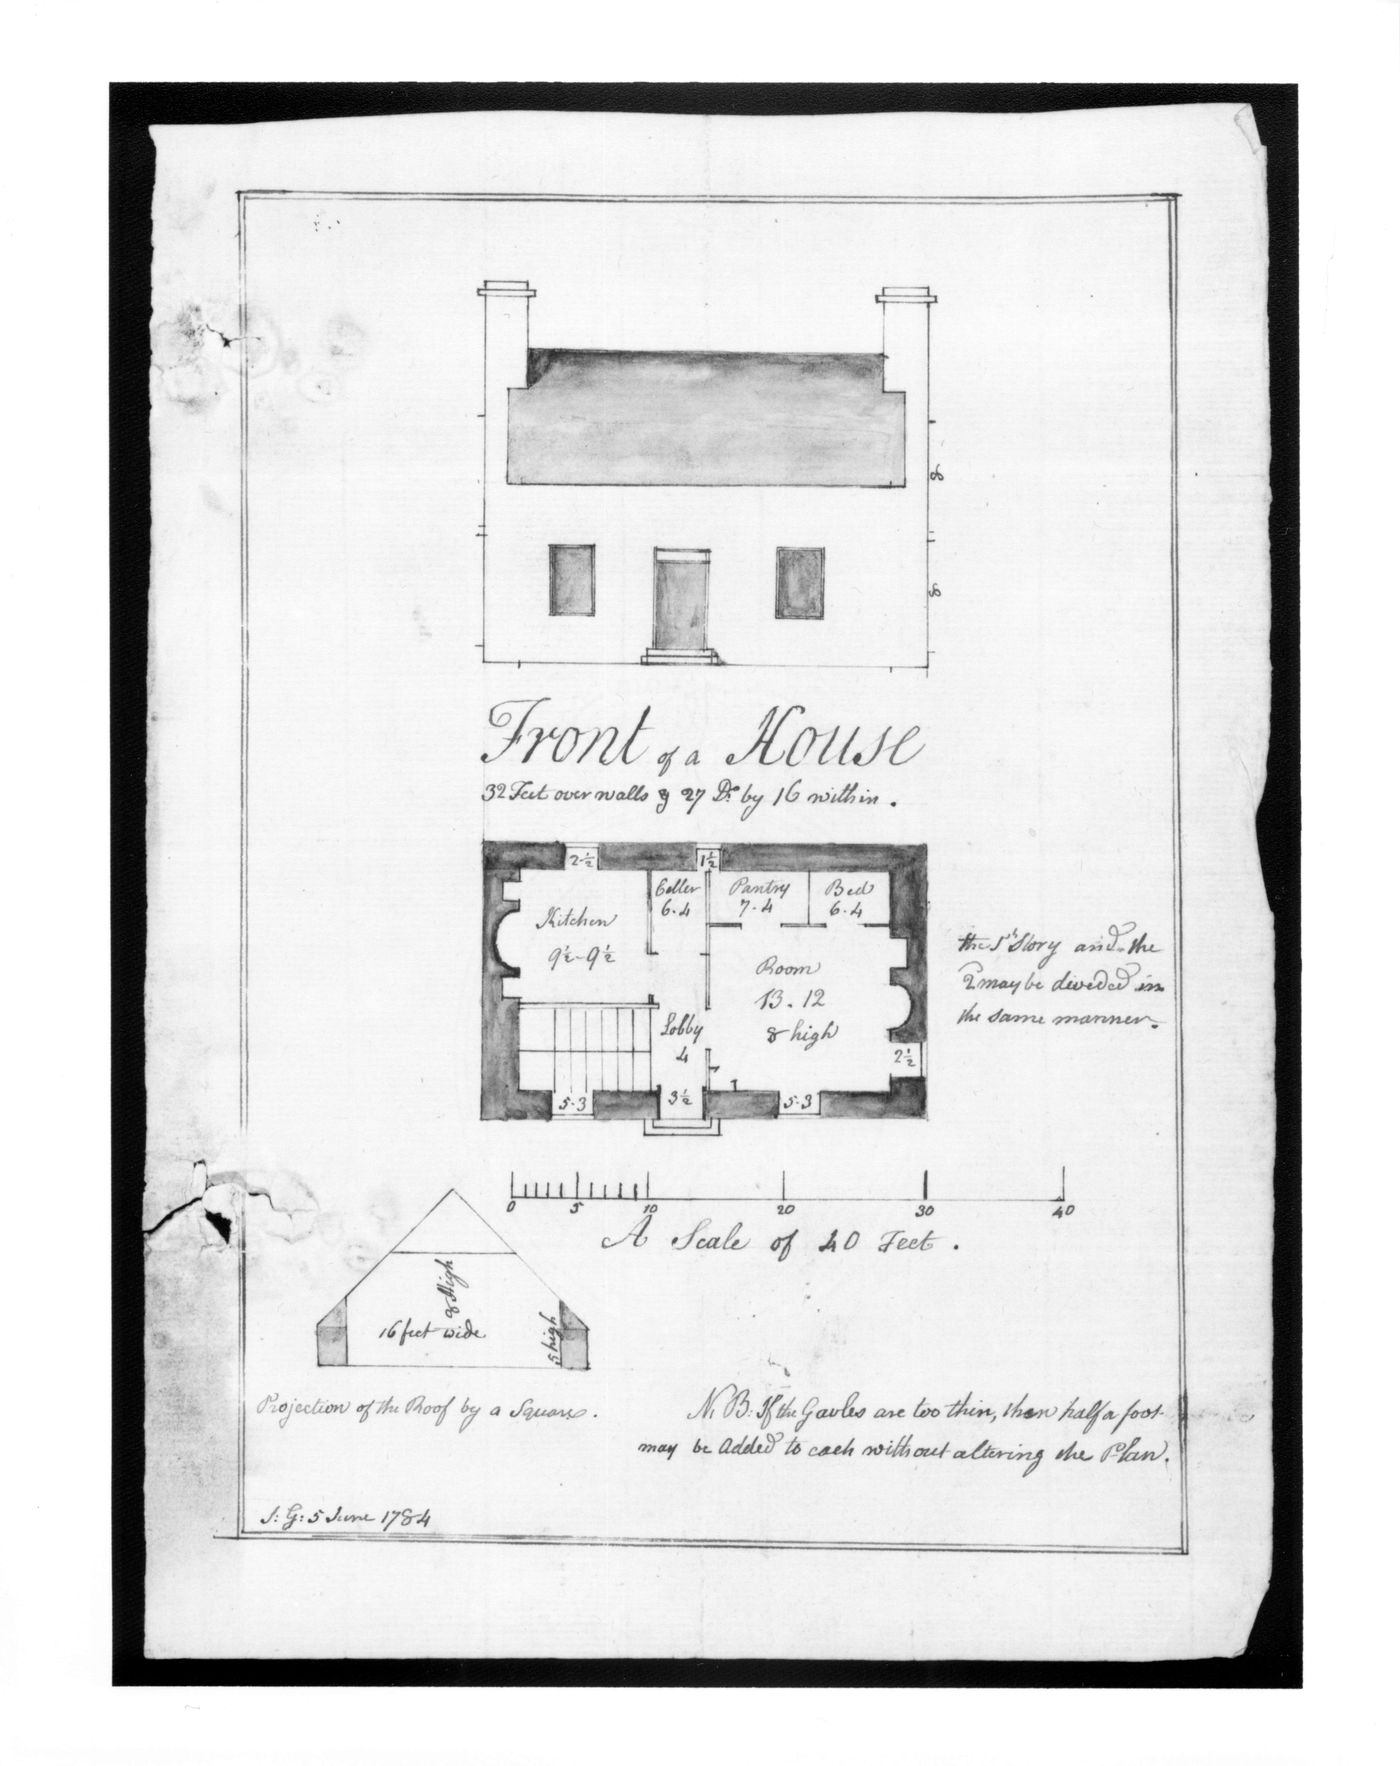 Plan, elevation and sectional detail for a house